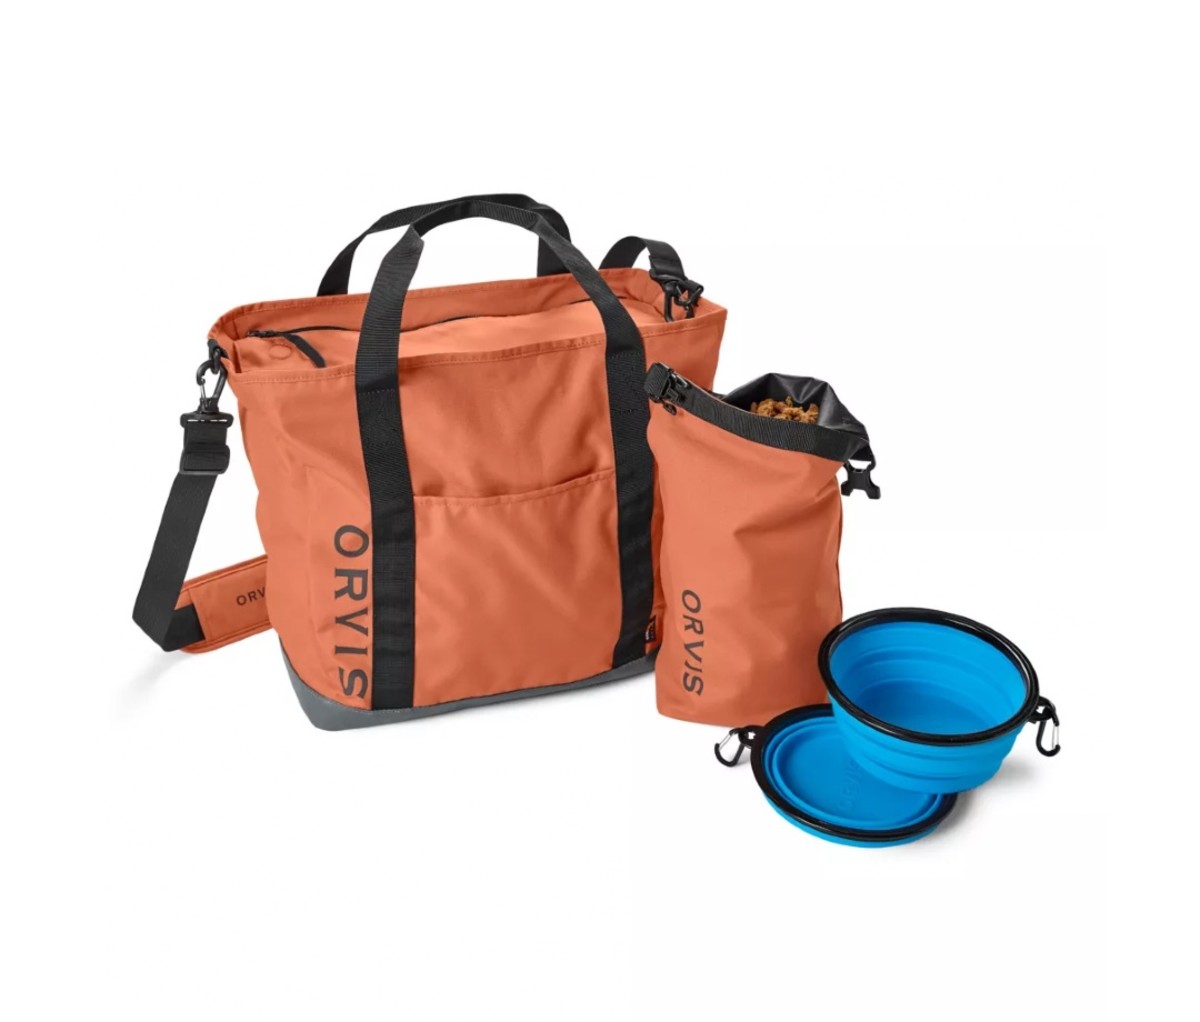 All your doggy supplies will be close at hand with the Orvis Chuckwagon Dog Tote.